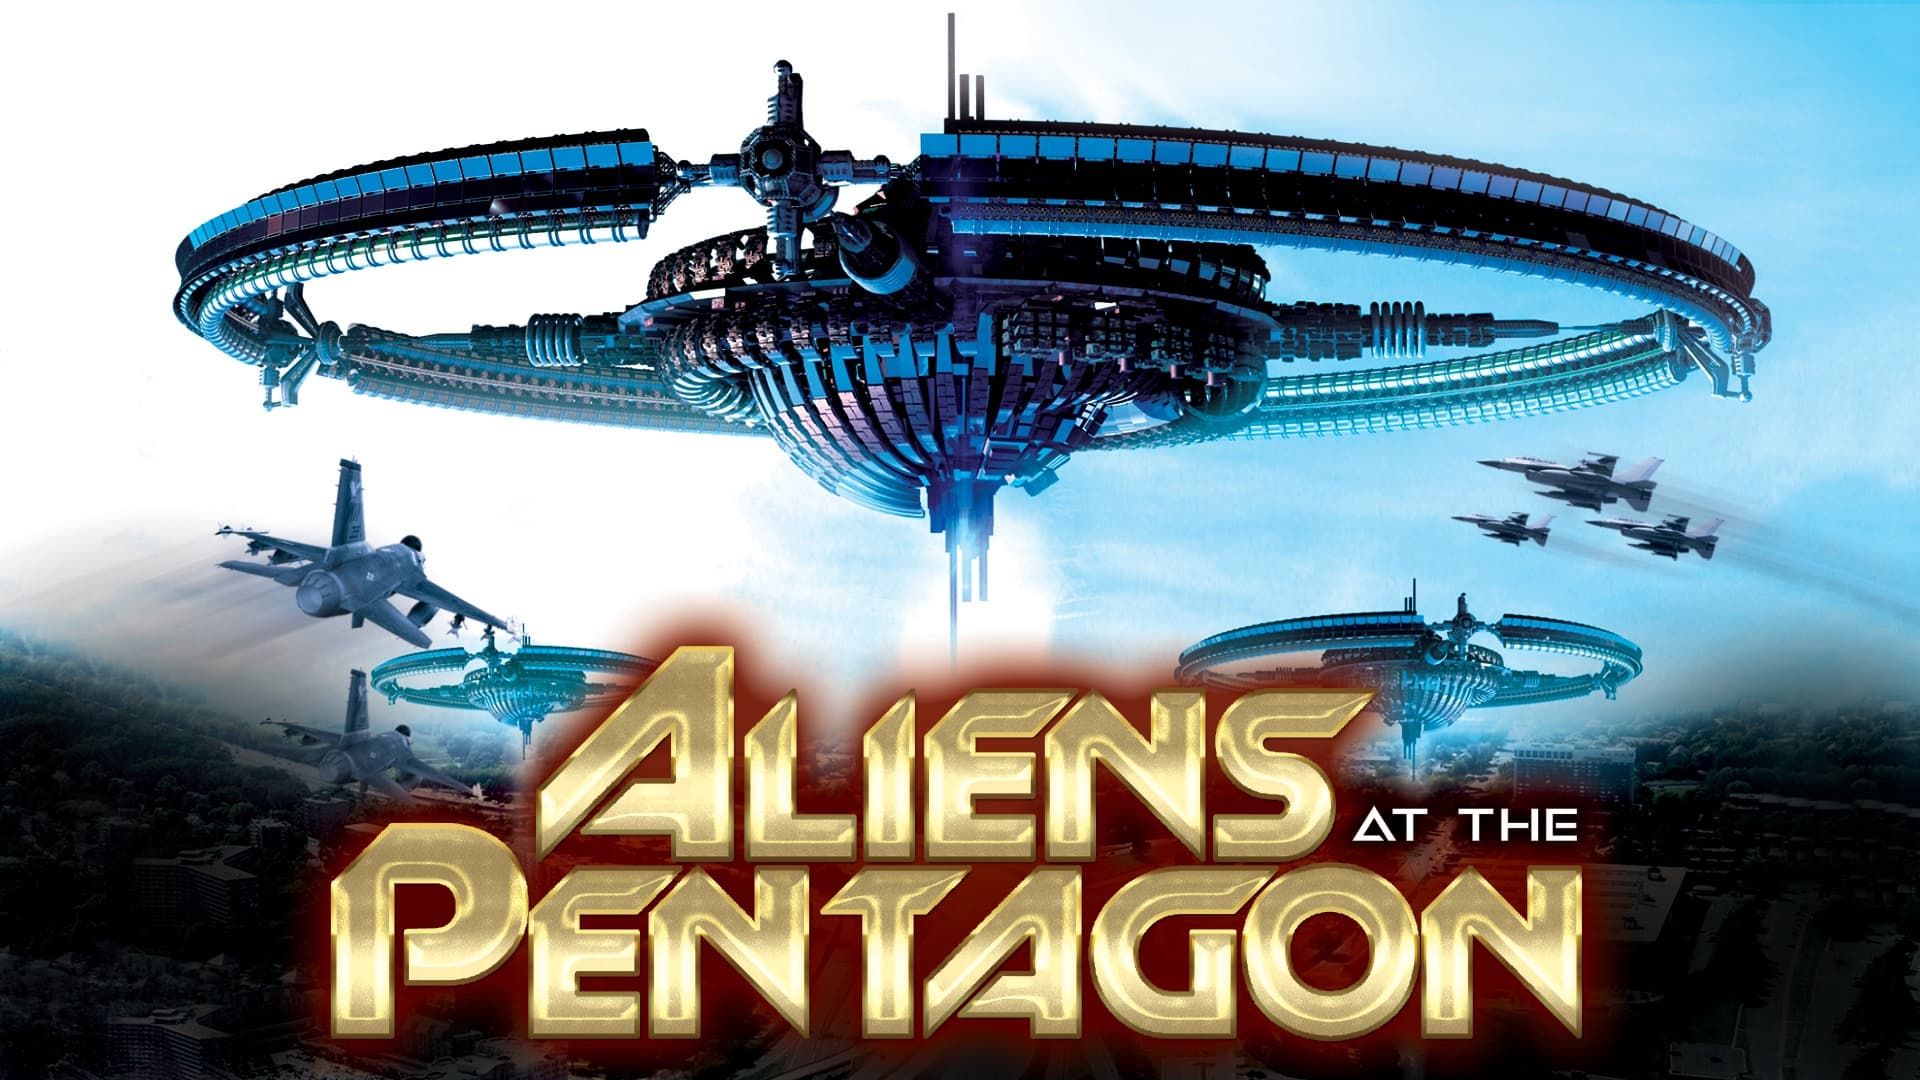 Aliens at the Pentagon background